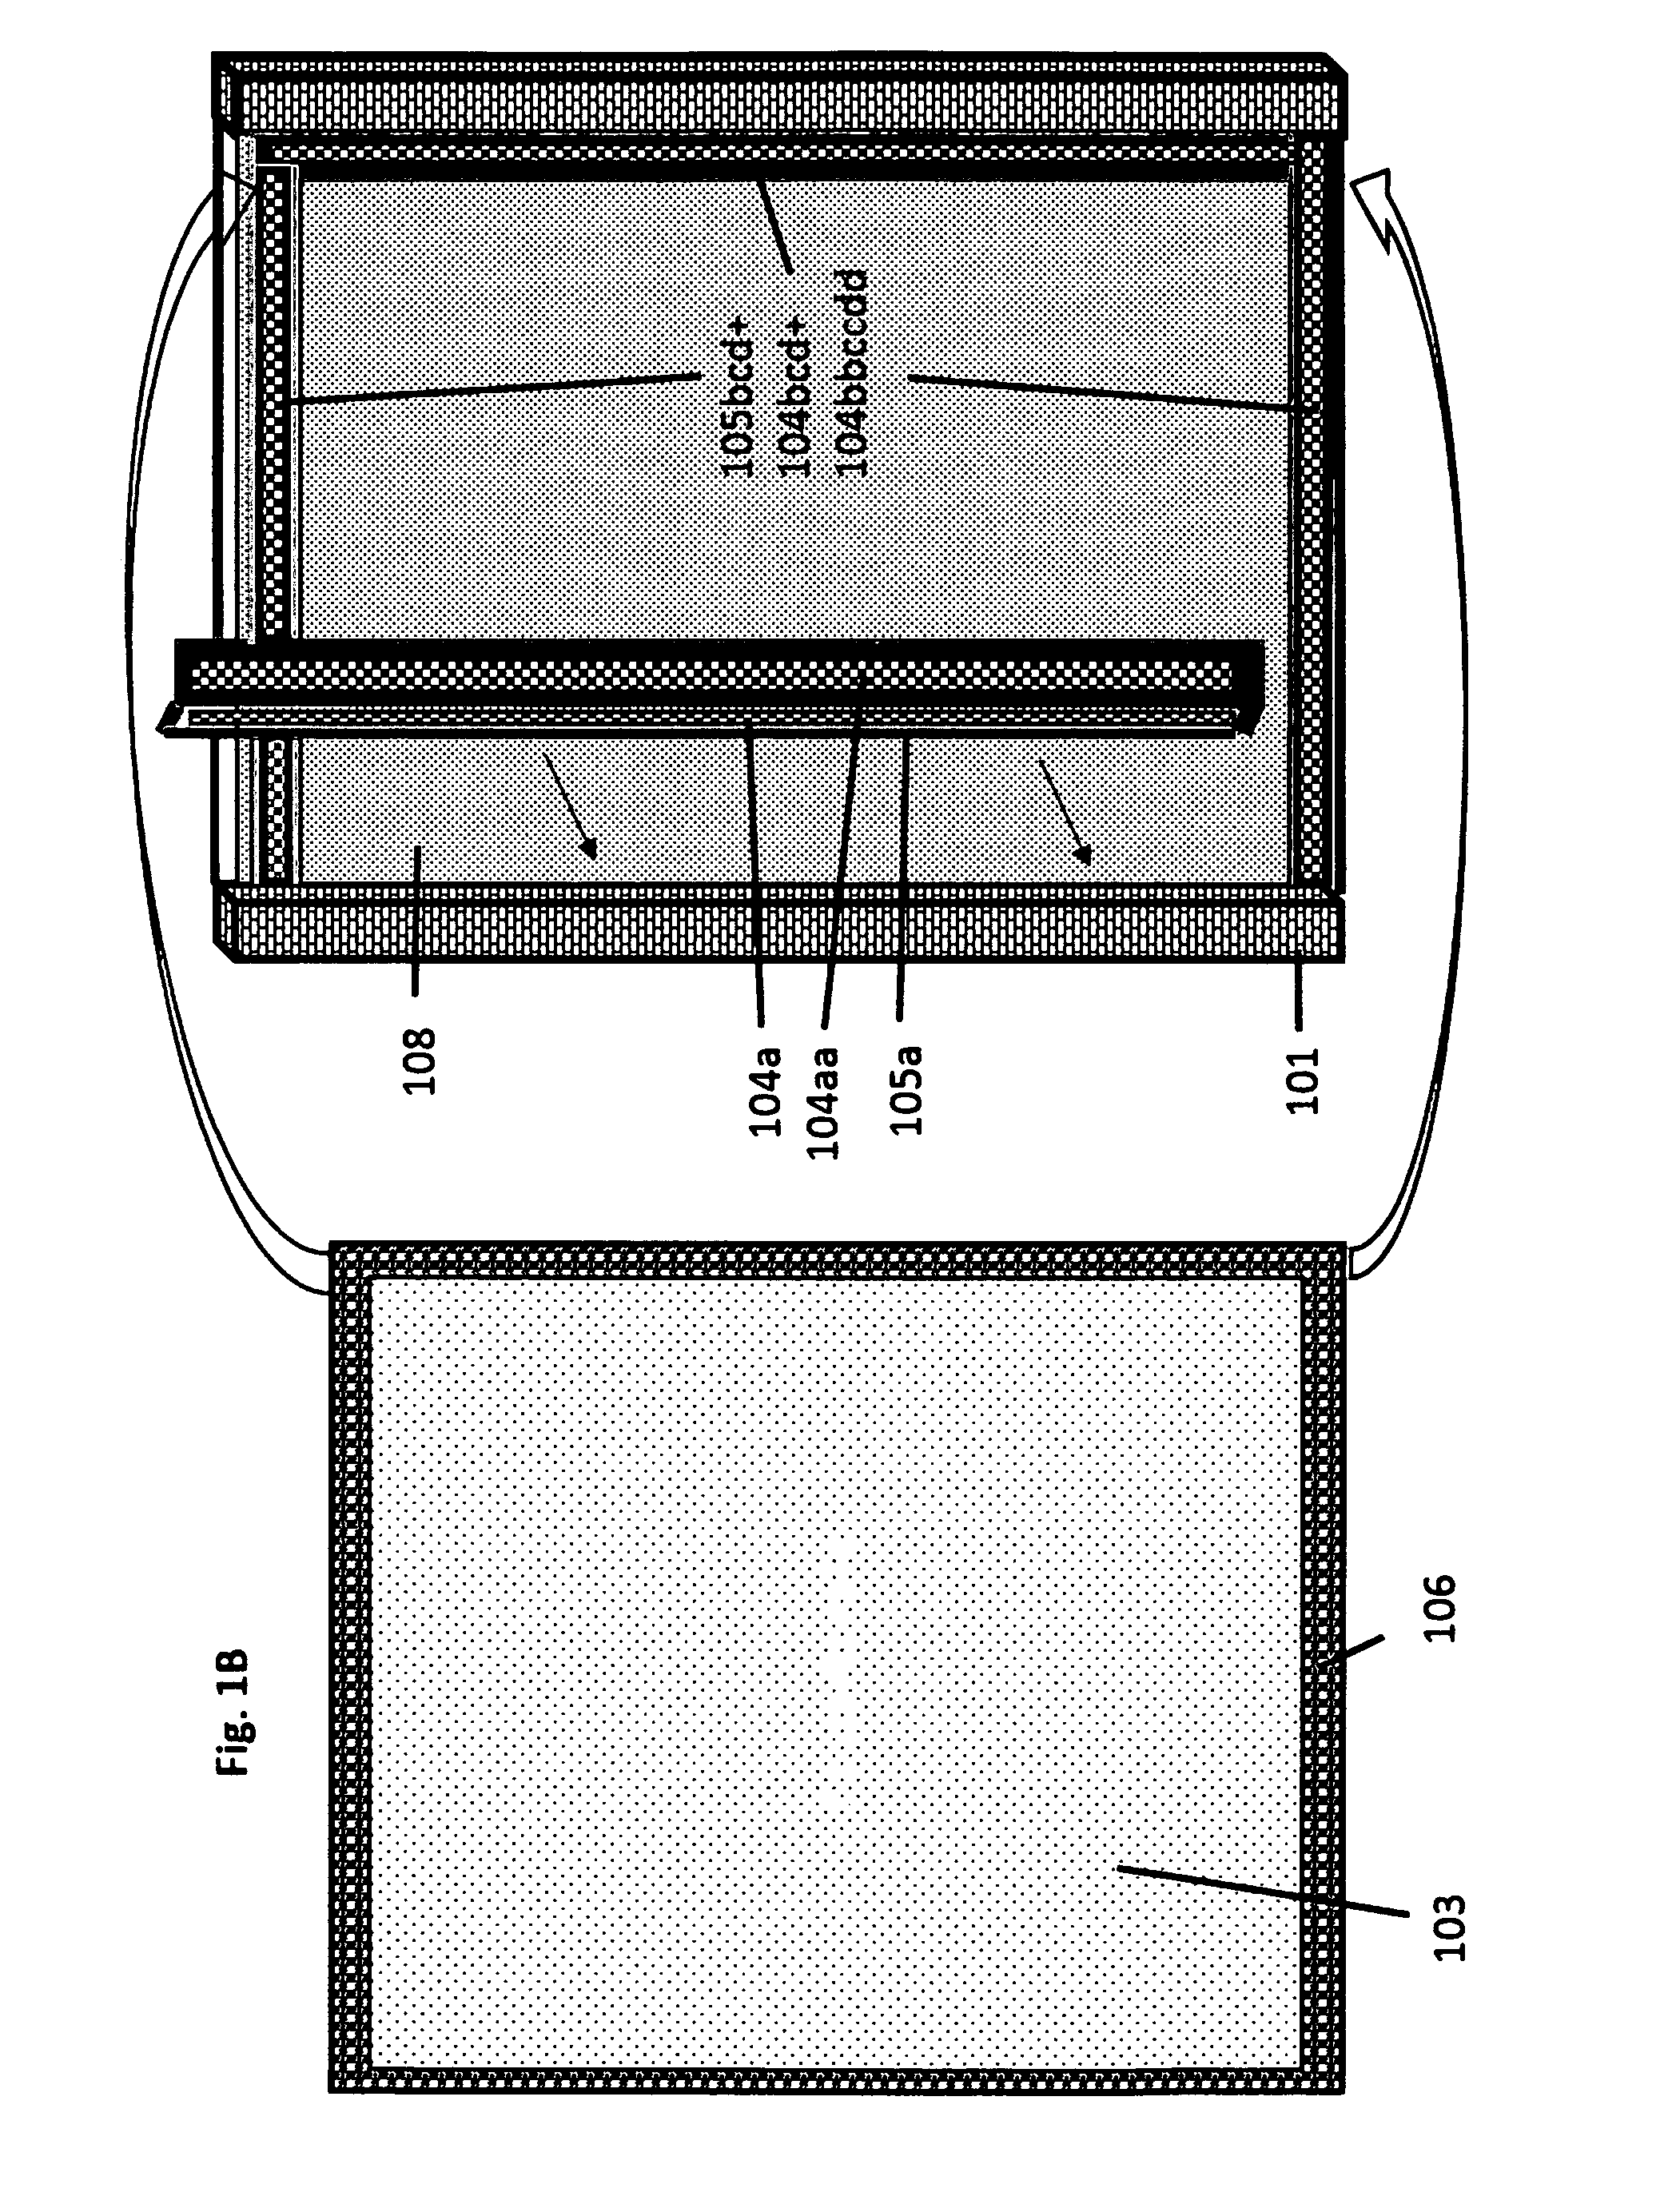 Protective Additional Glazing Systems, Apparatus, and Methods For Structural Openings